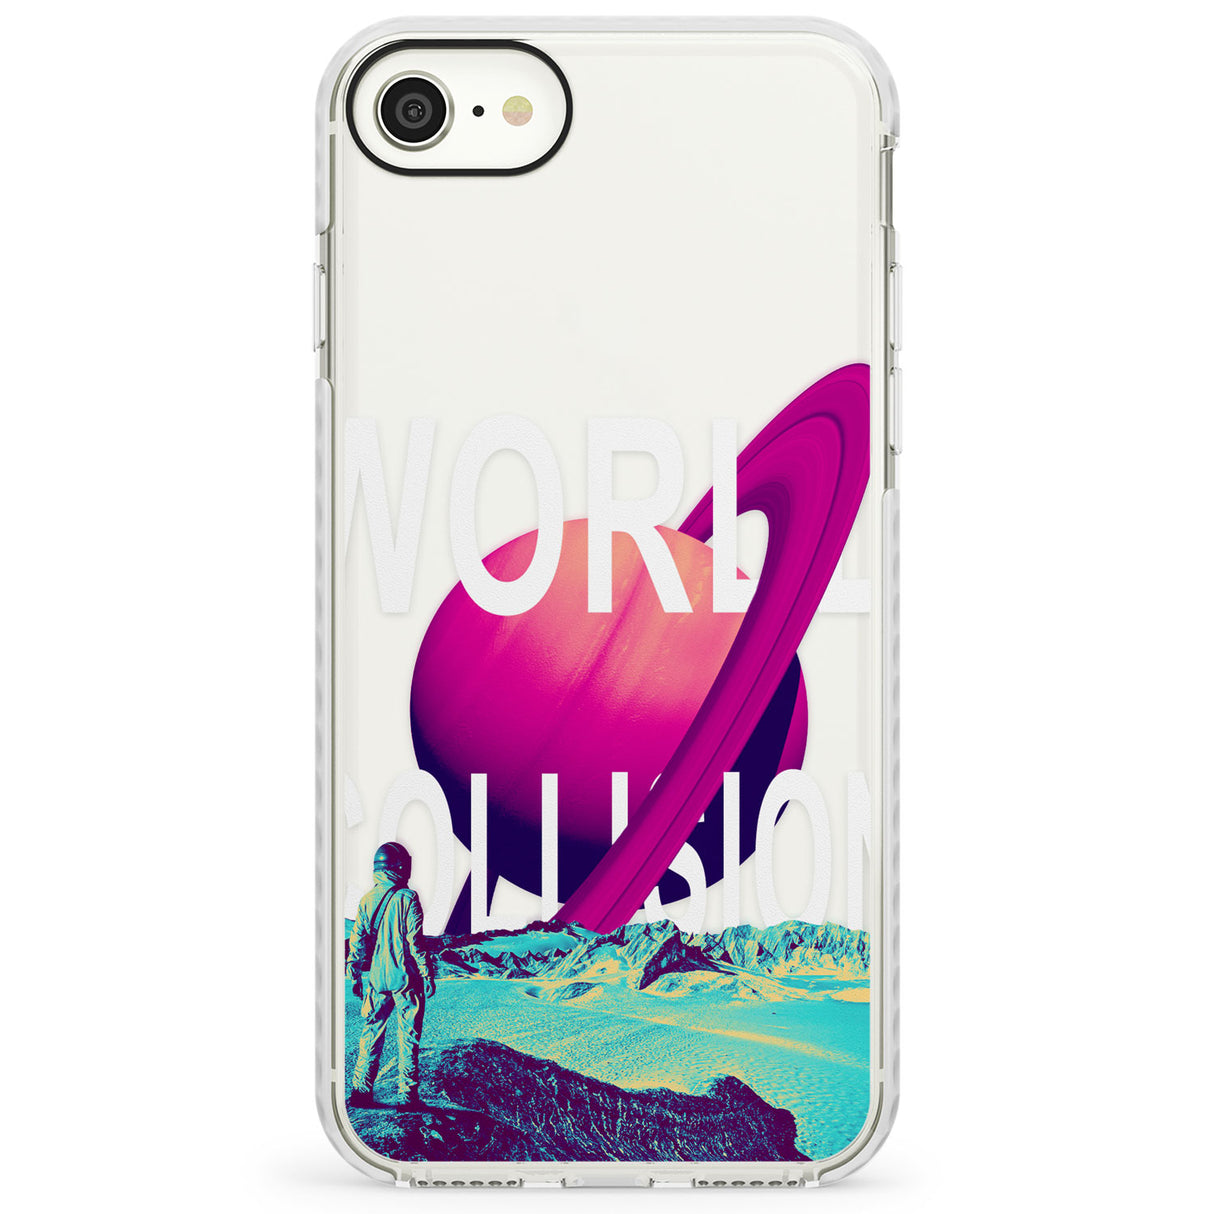 World CollisionImpact Phone Case for iPhone SE